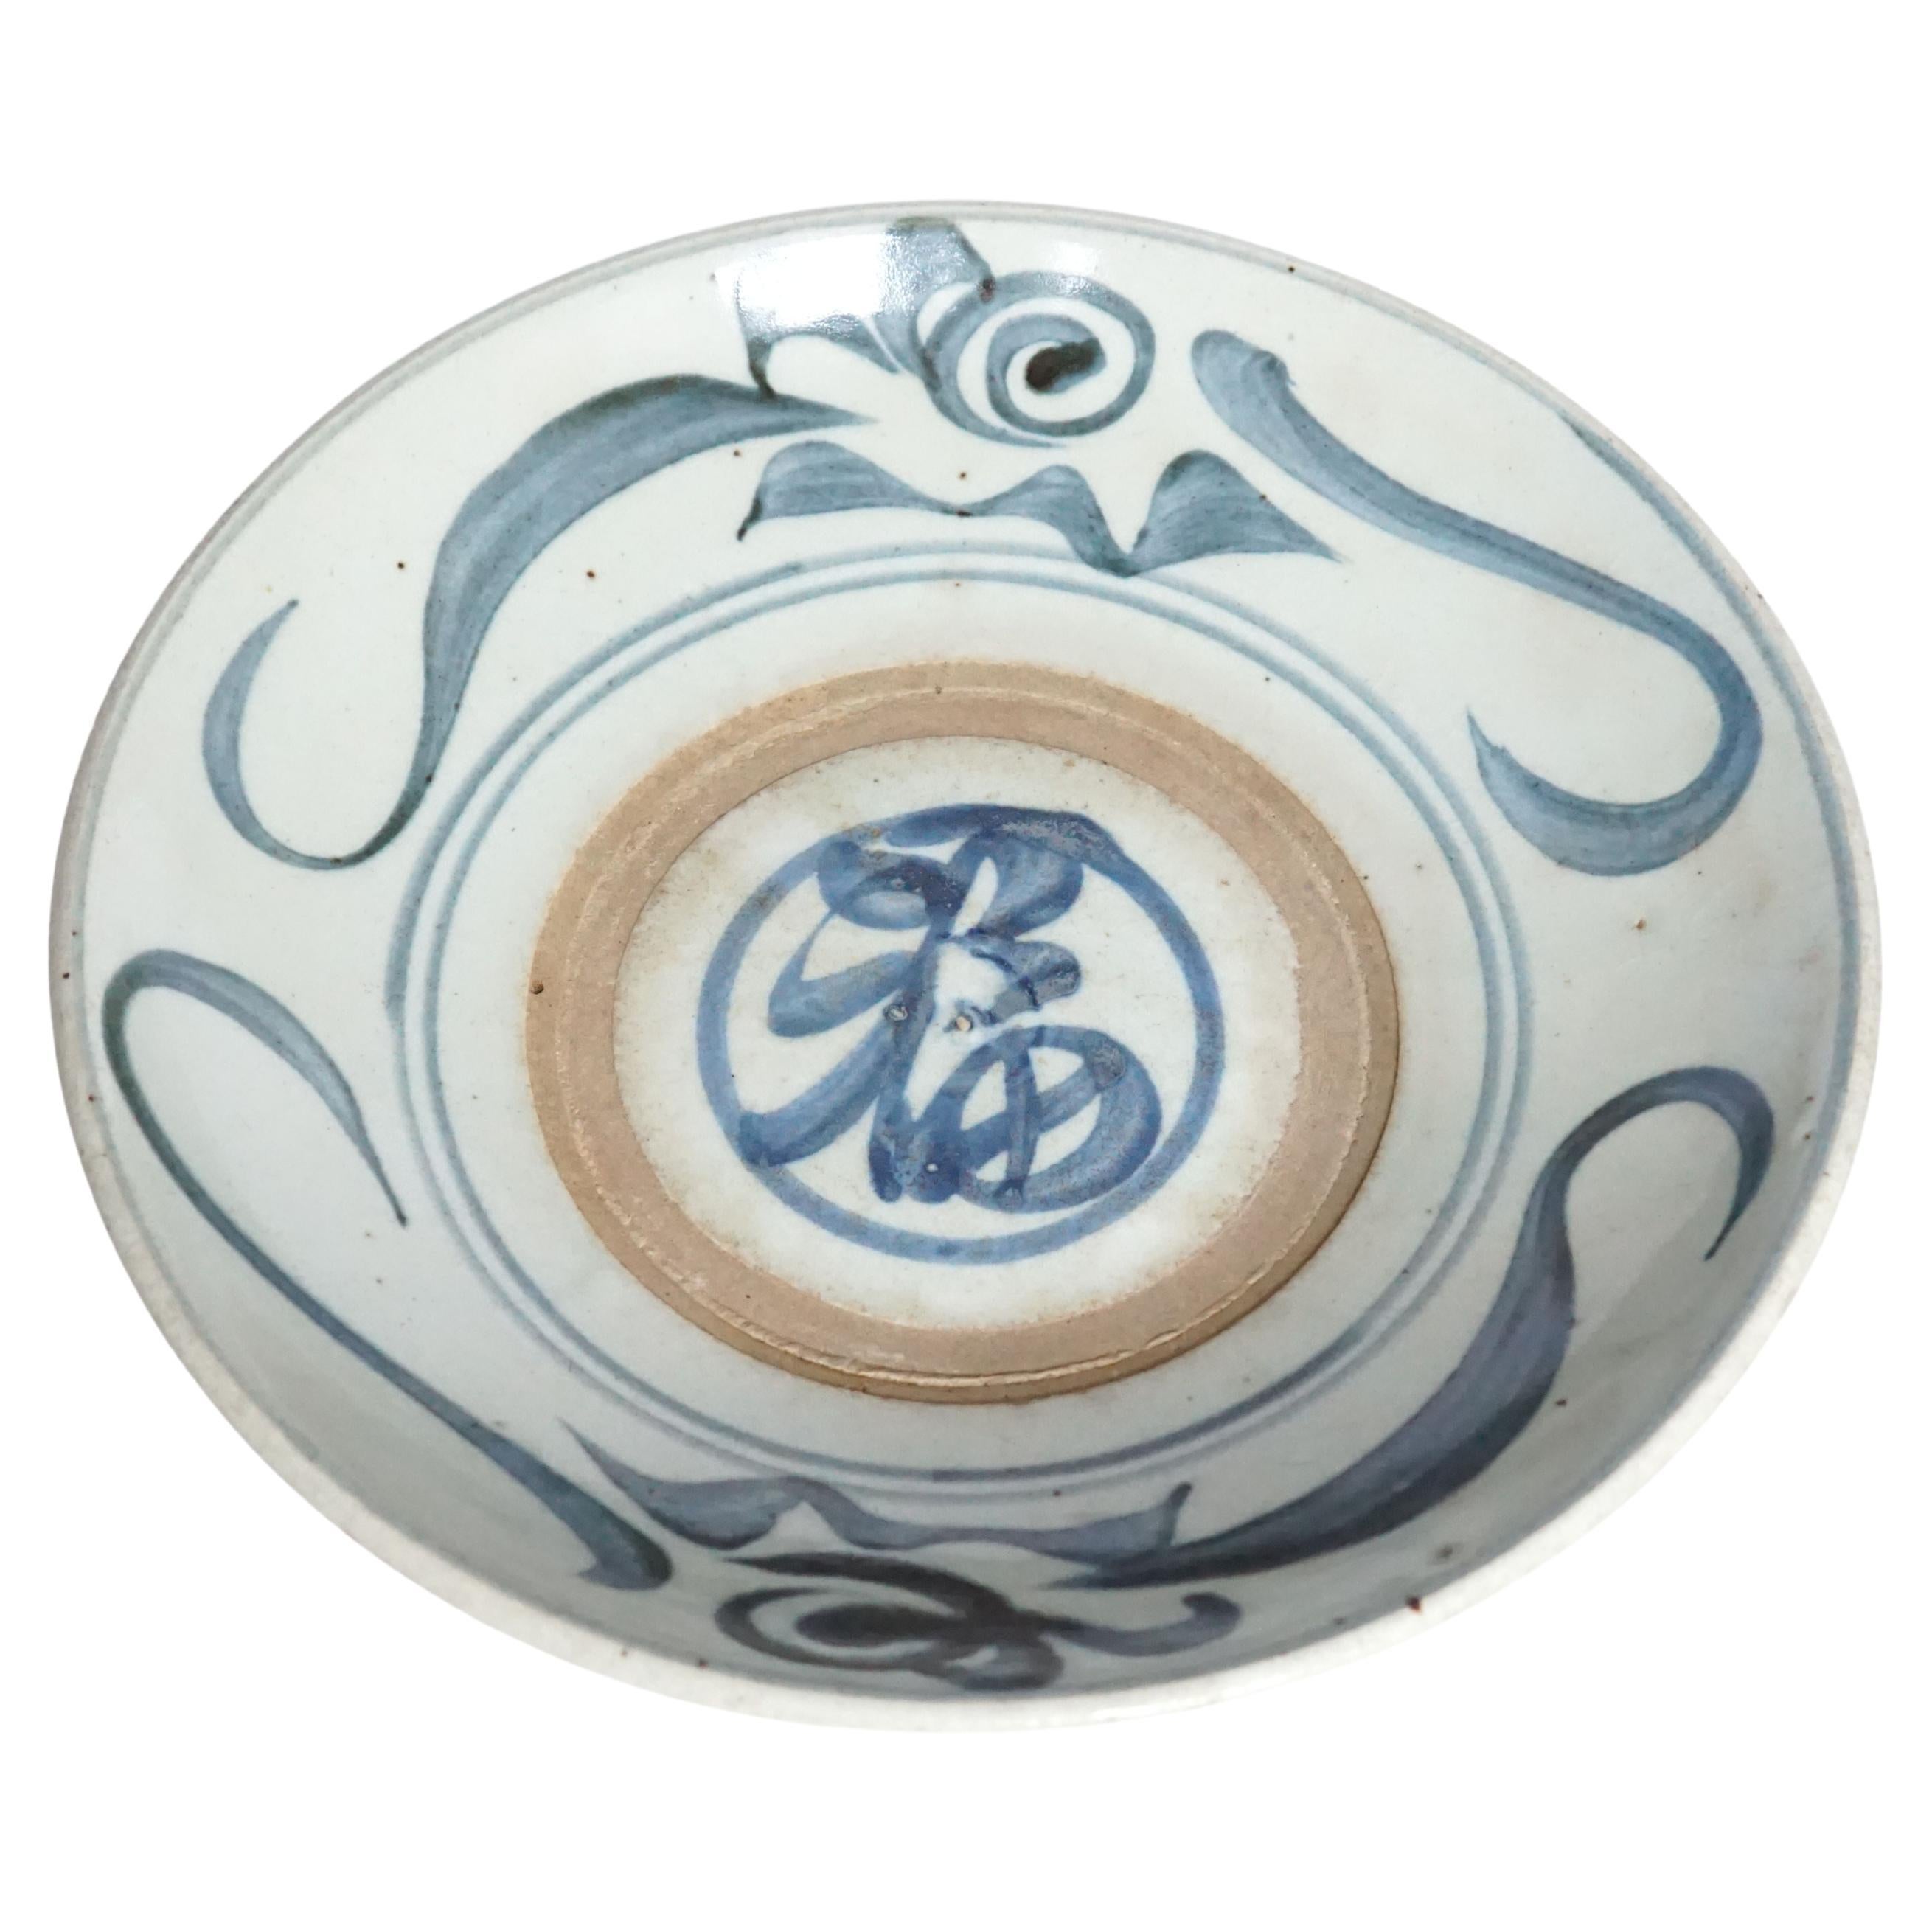 Qing Dynasty Chinese Blue & White Porcelain with Wonderful Strokes, c.1850